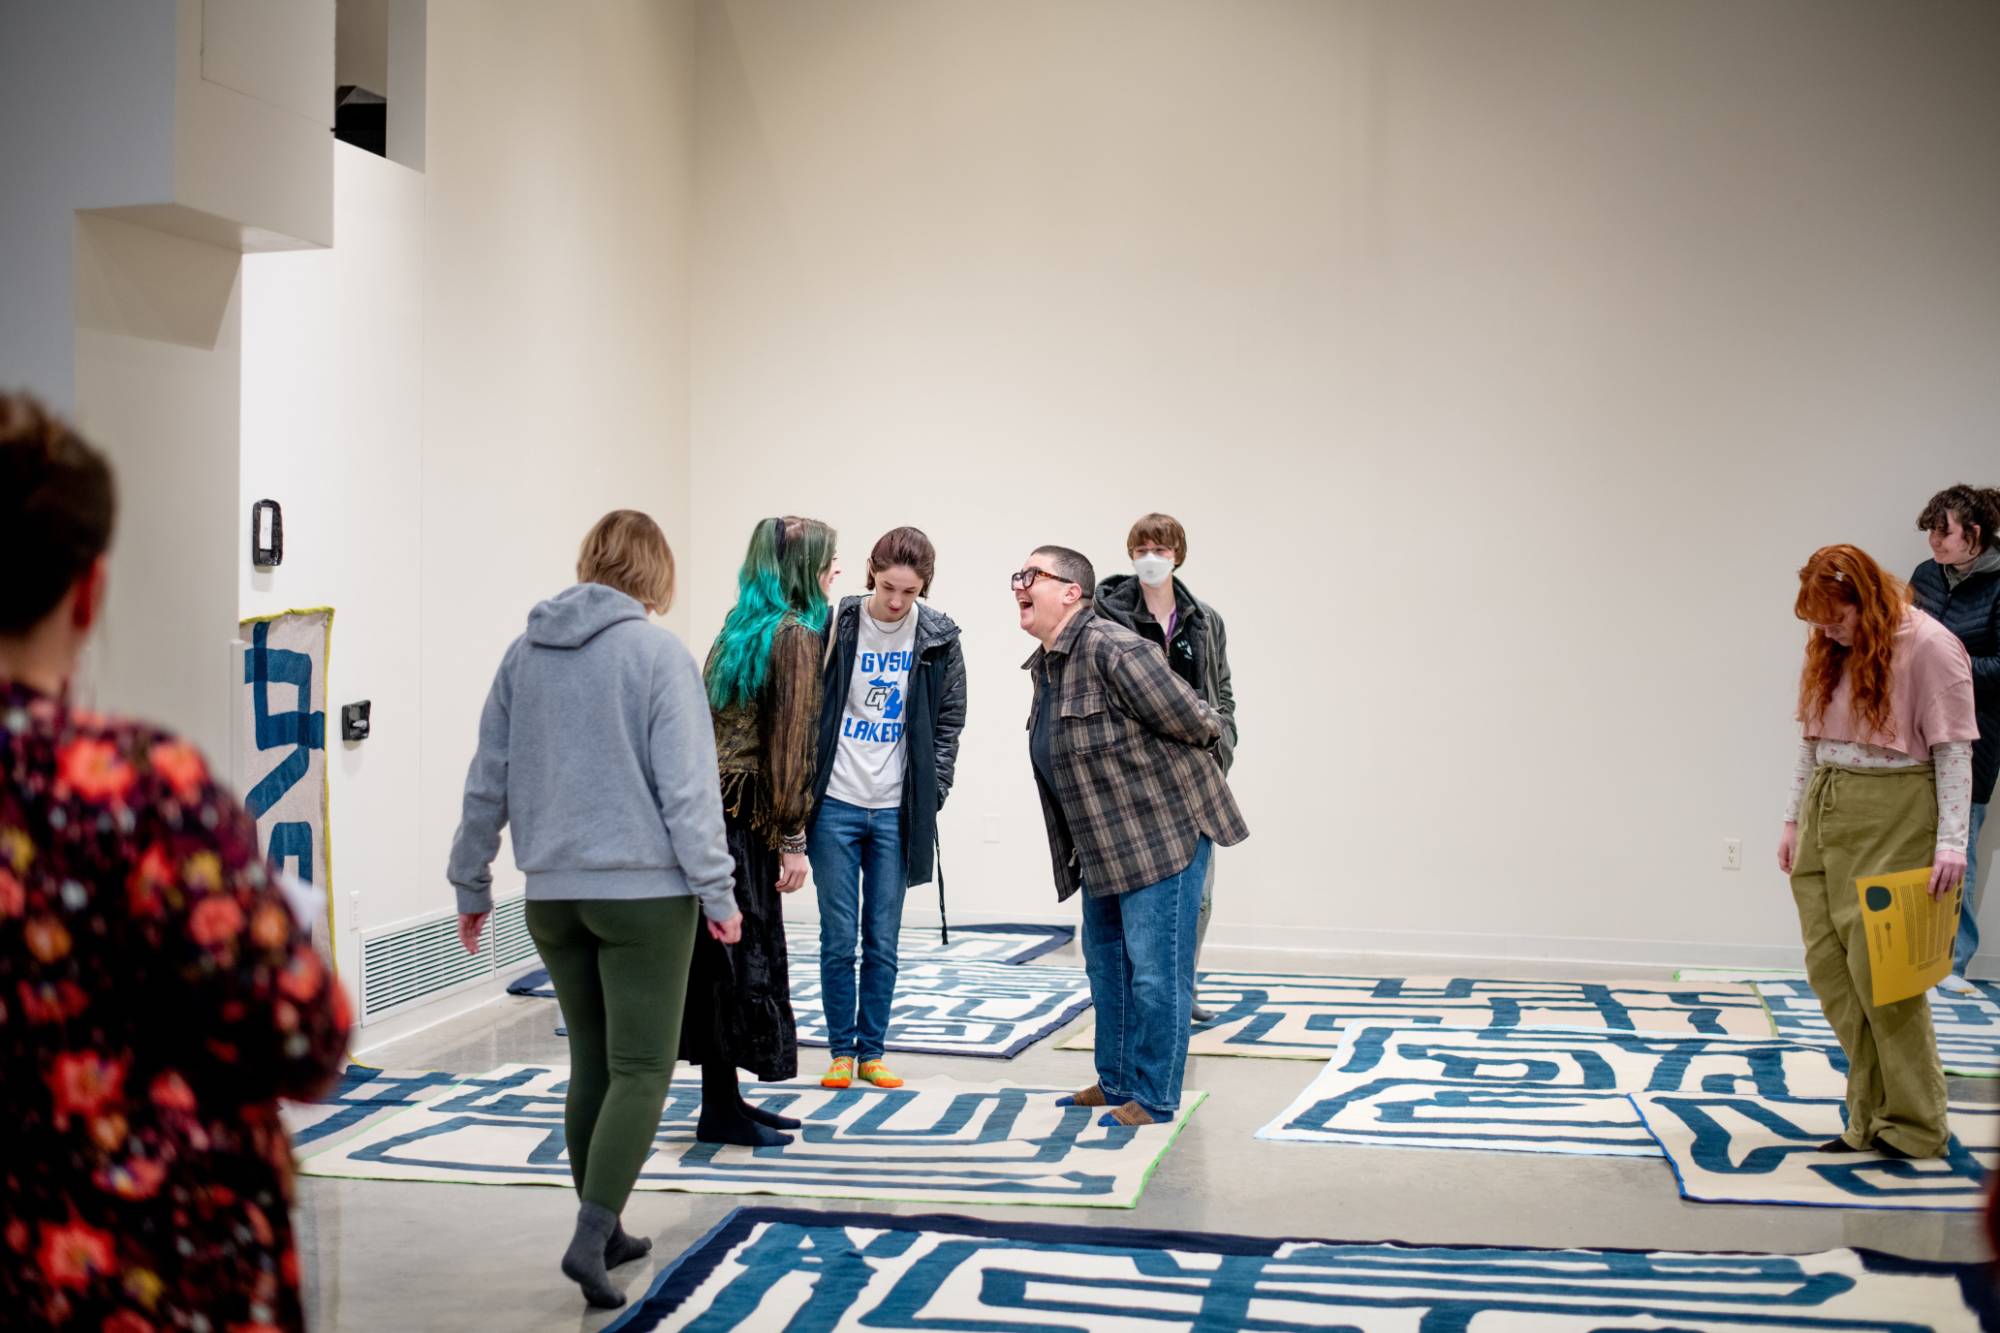 Visitors to the Padnos Gallery standing on an art installation by Emmy Bright, made up of wool rugs drawn on by a printmaking process to look like lines.